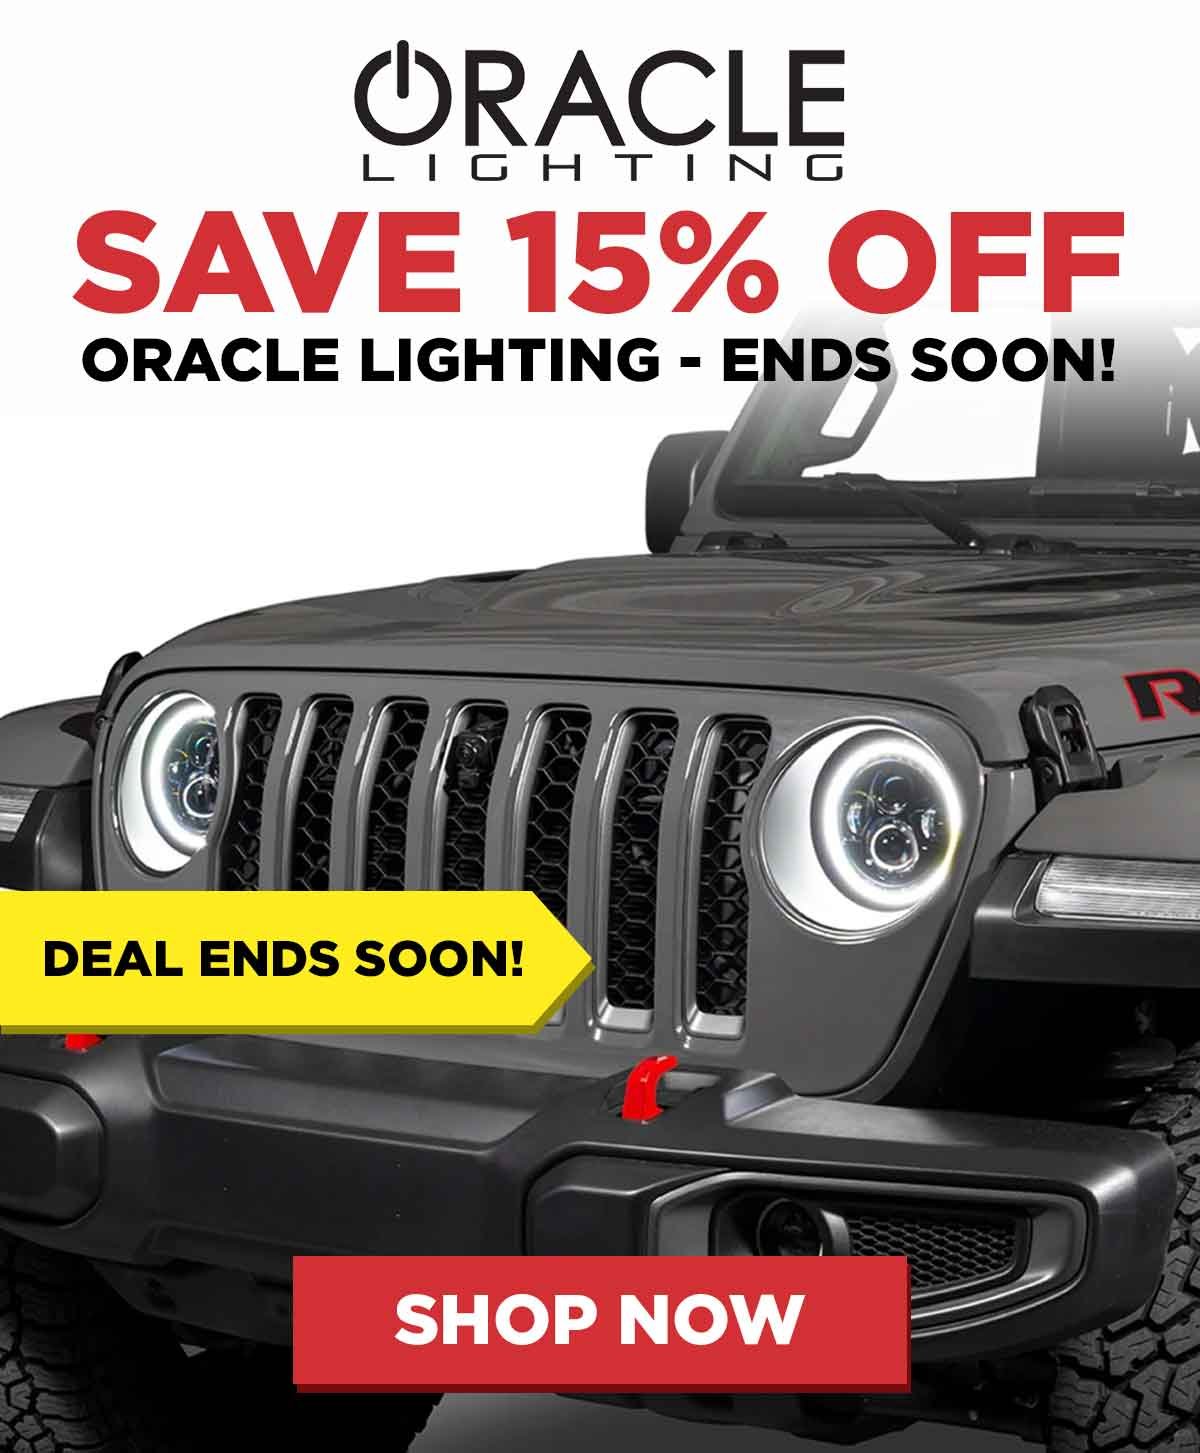 Save 15% Off Oracle Lighting - Ends Soon!